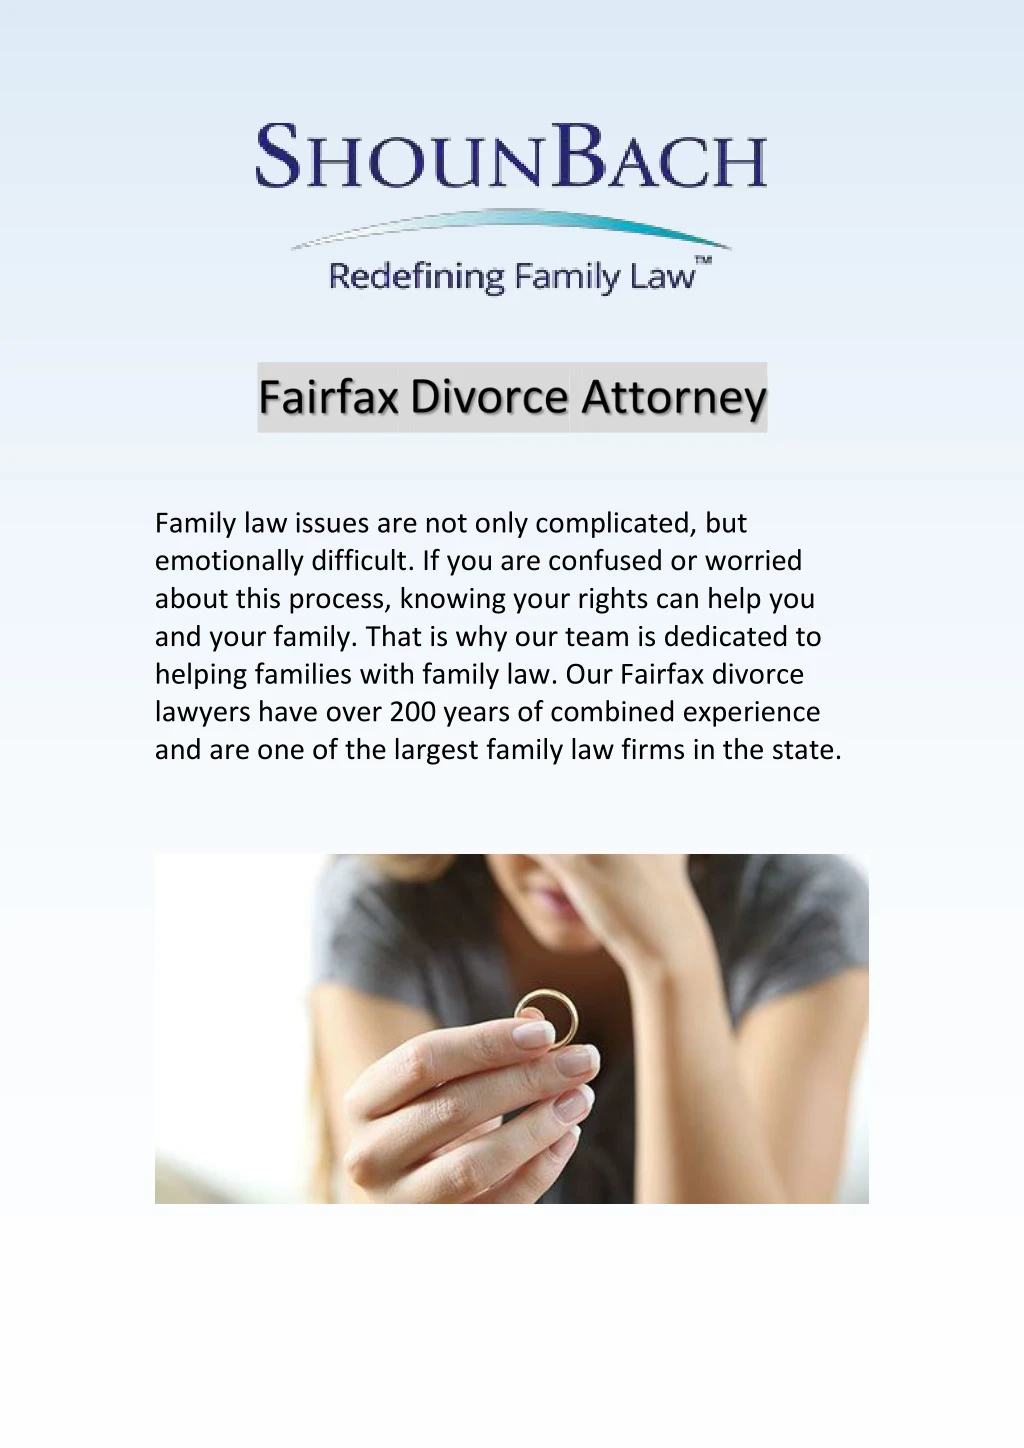 family law issues are not only complicated